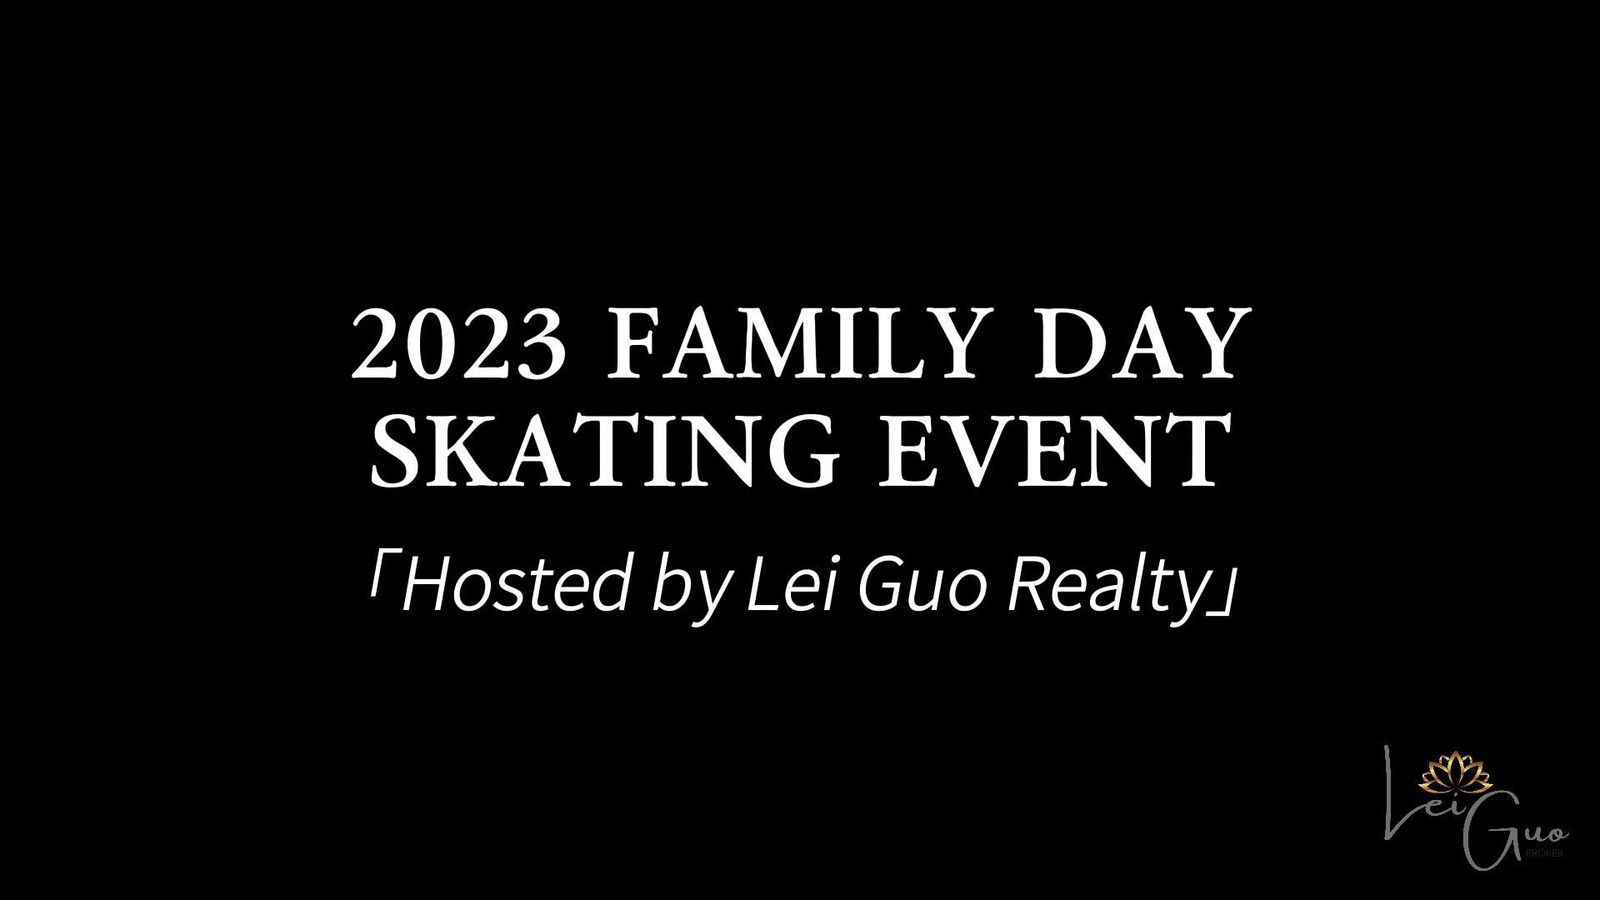 Lei Guo Realty 2023 Family Day Skating Event